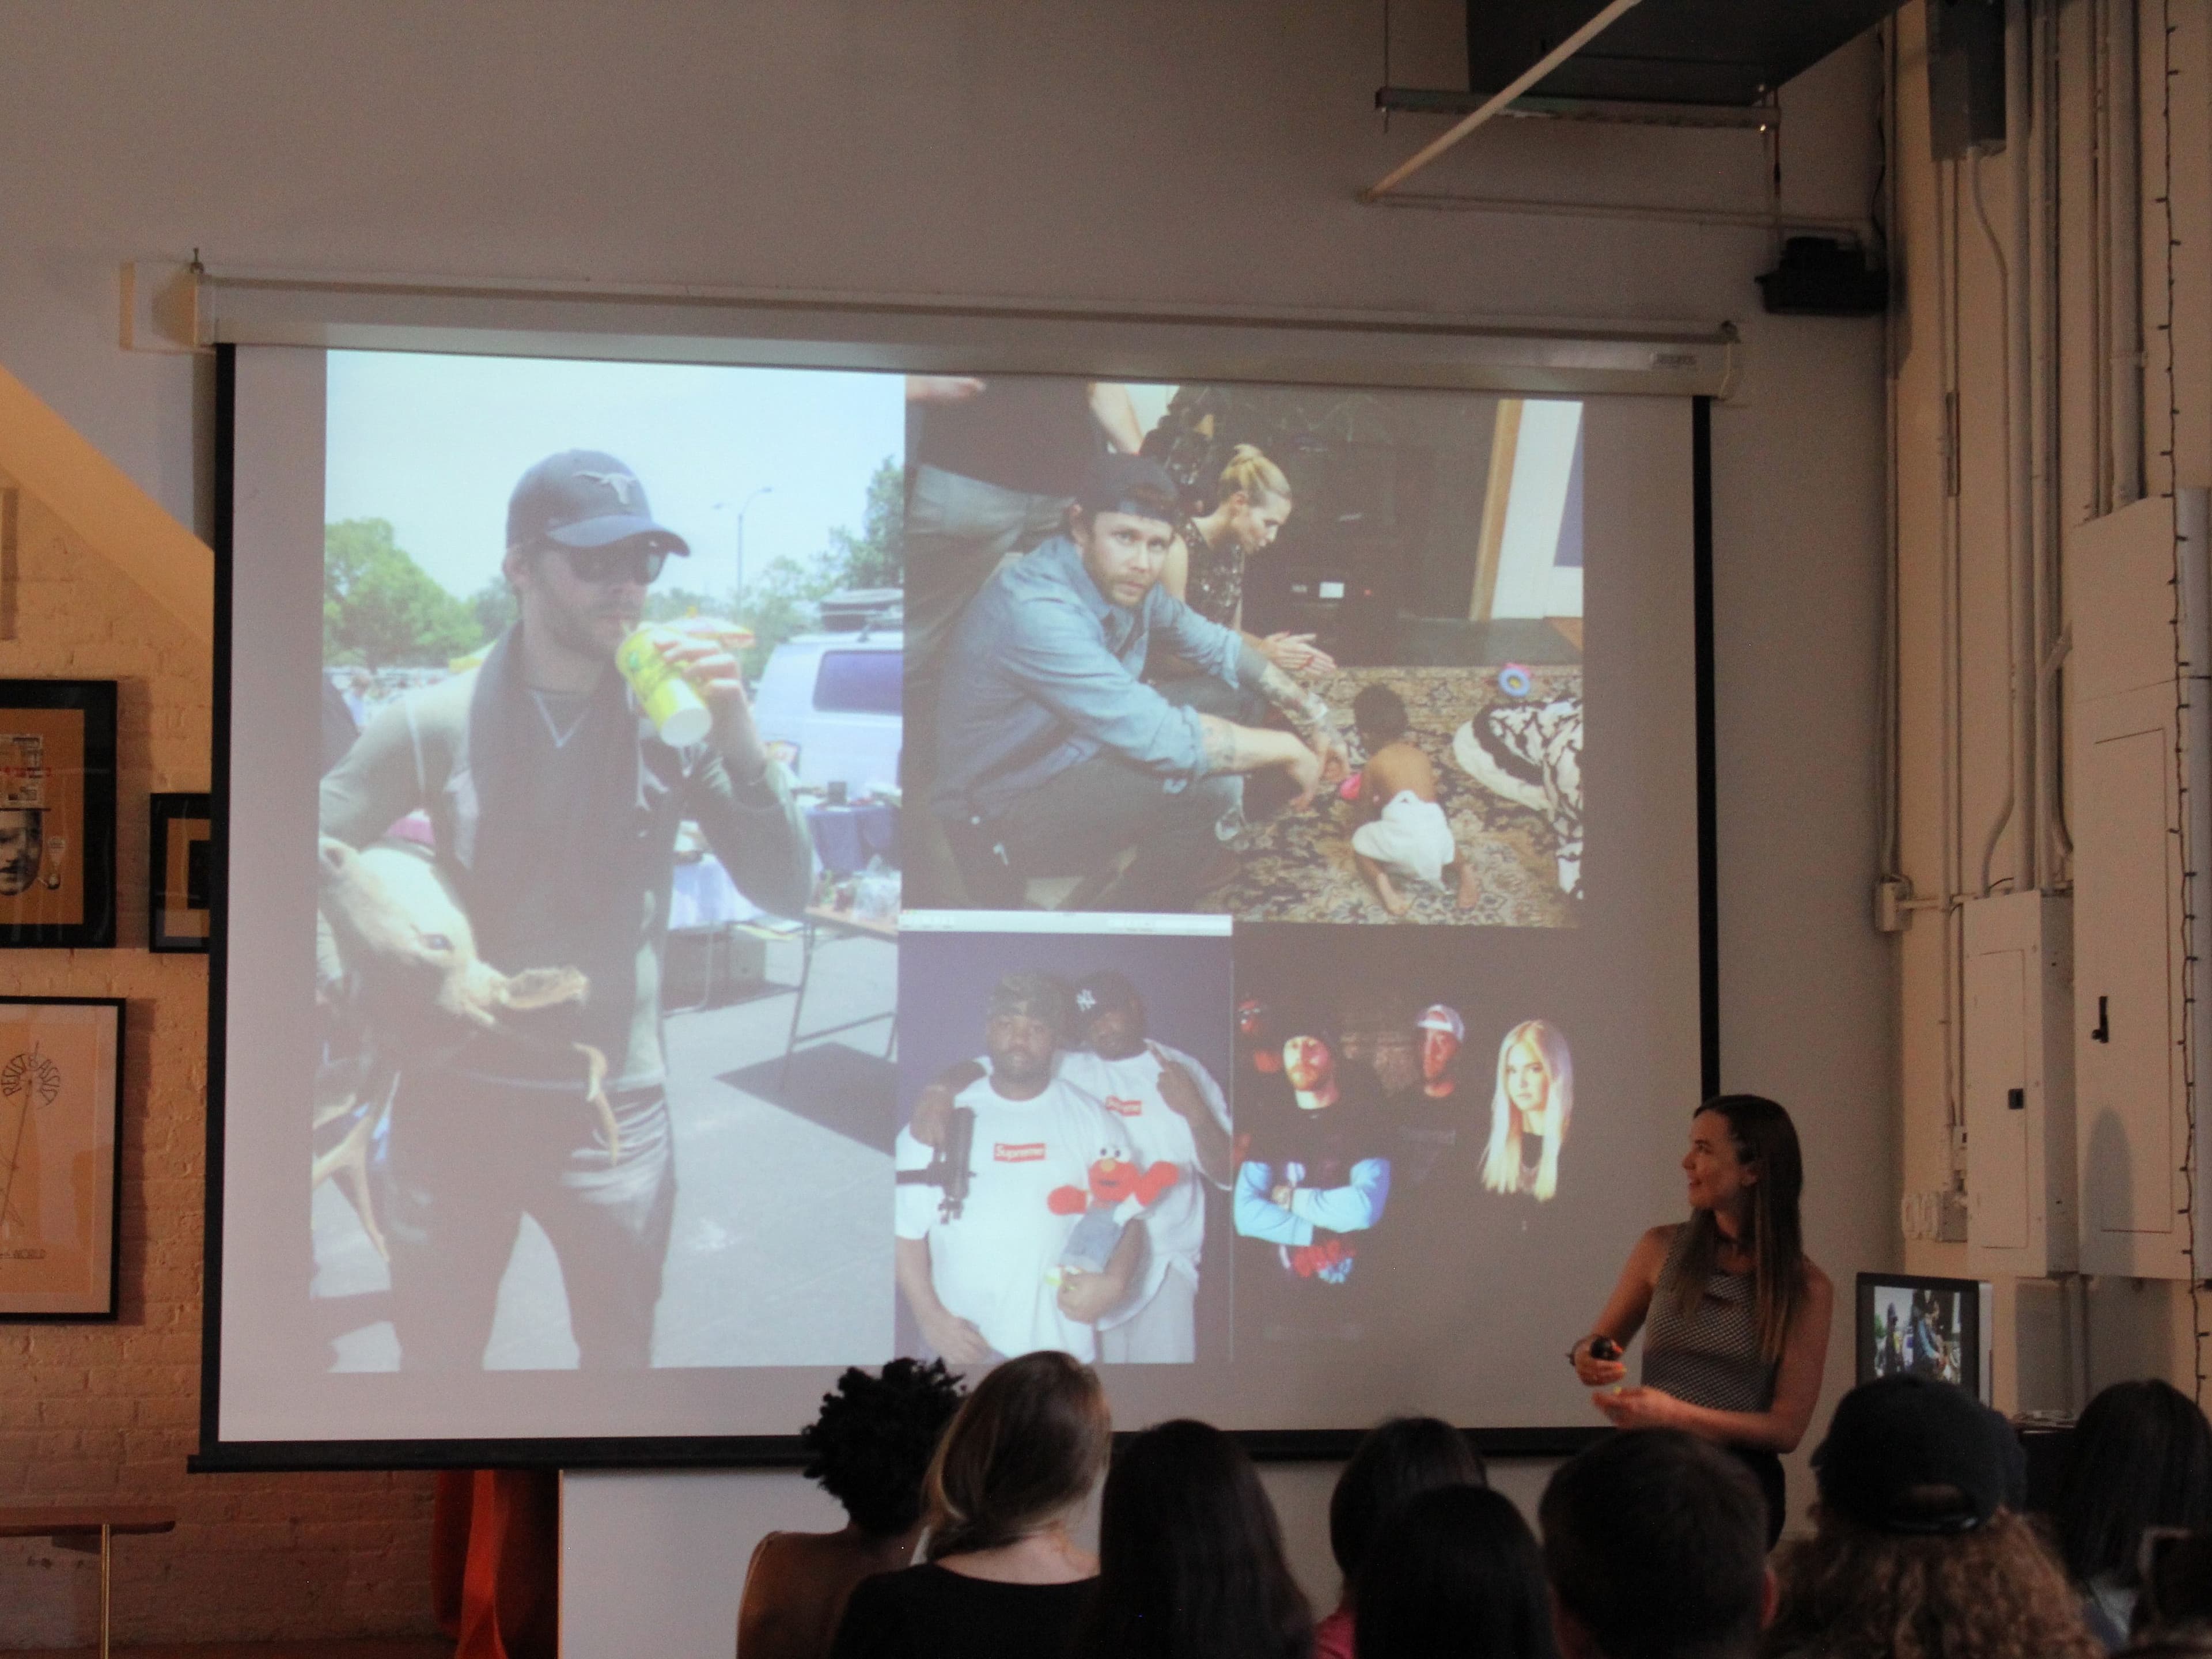 A woman stands in front of a group of people, presenting to an audience with a slideshow projected behind her. The slideshow features multiple photos of people engaging in various activities, including holding animals, eating food, and posing outdoors.